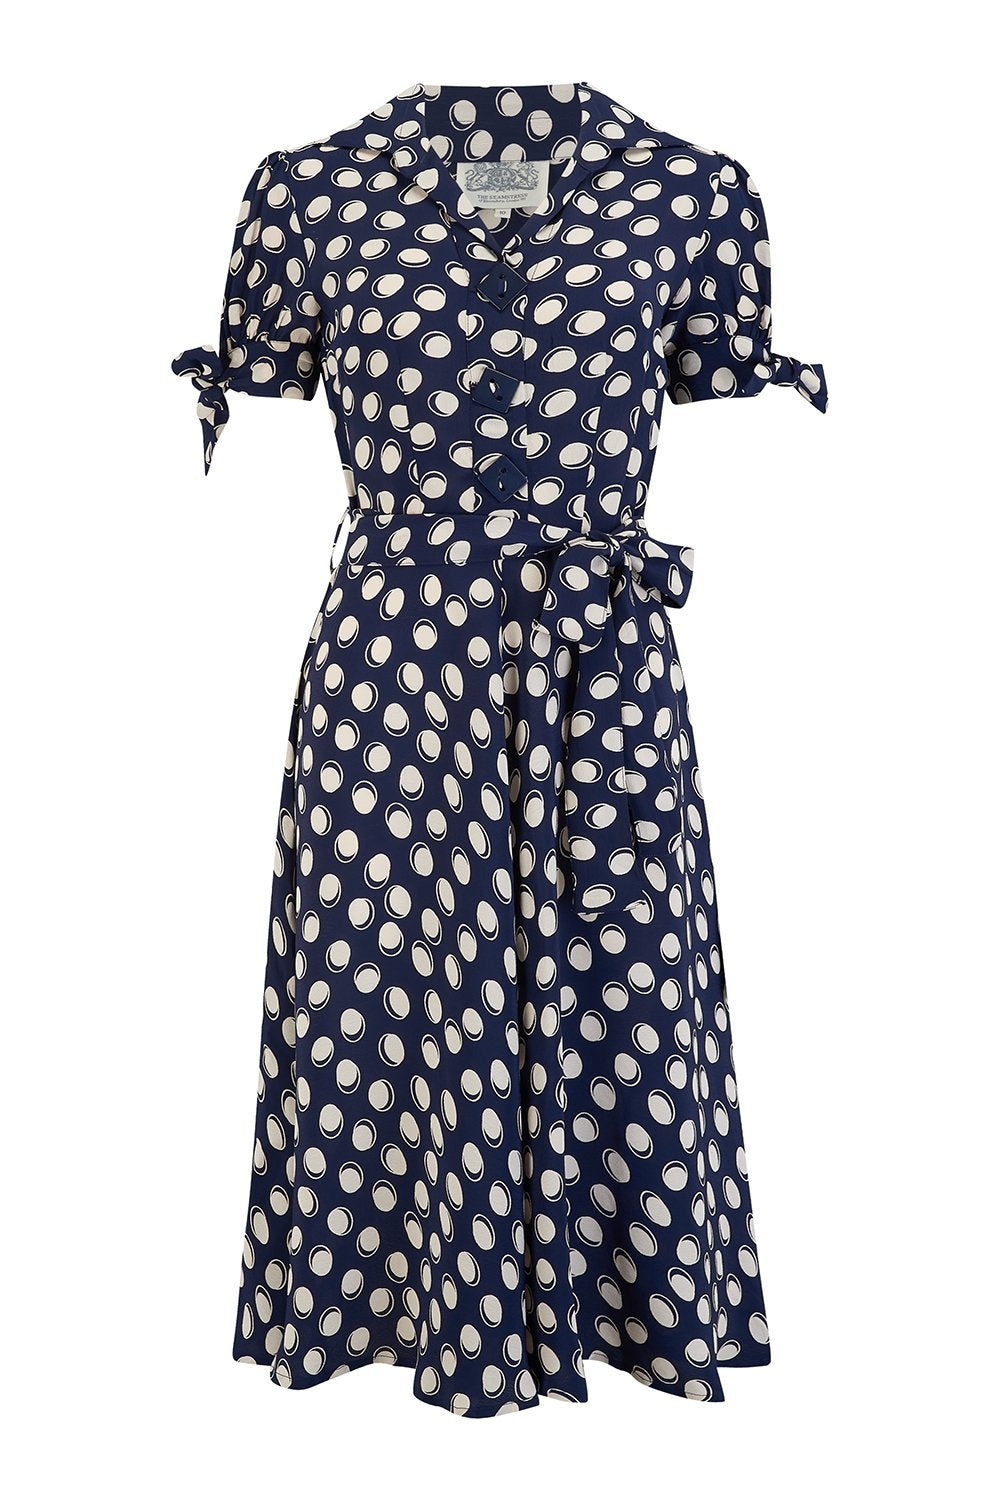 "Iris" Tea Dress in Navy Moonshine Print, Classic & Authentic 1940s Style at its Best - CC41, Goodwood Revival, Twinwood Festival, Viva Las Vegas Rockabilly Weekend Rock n Romance The Seamstress Of Bloomsbury